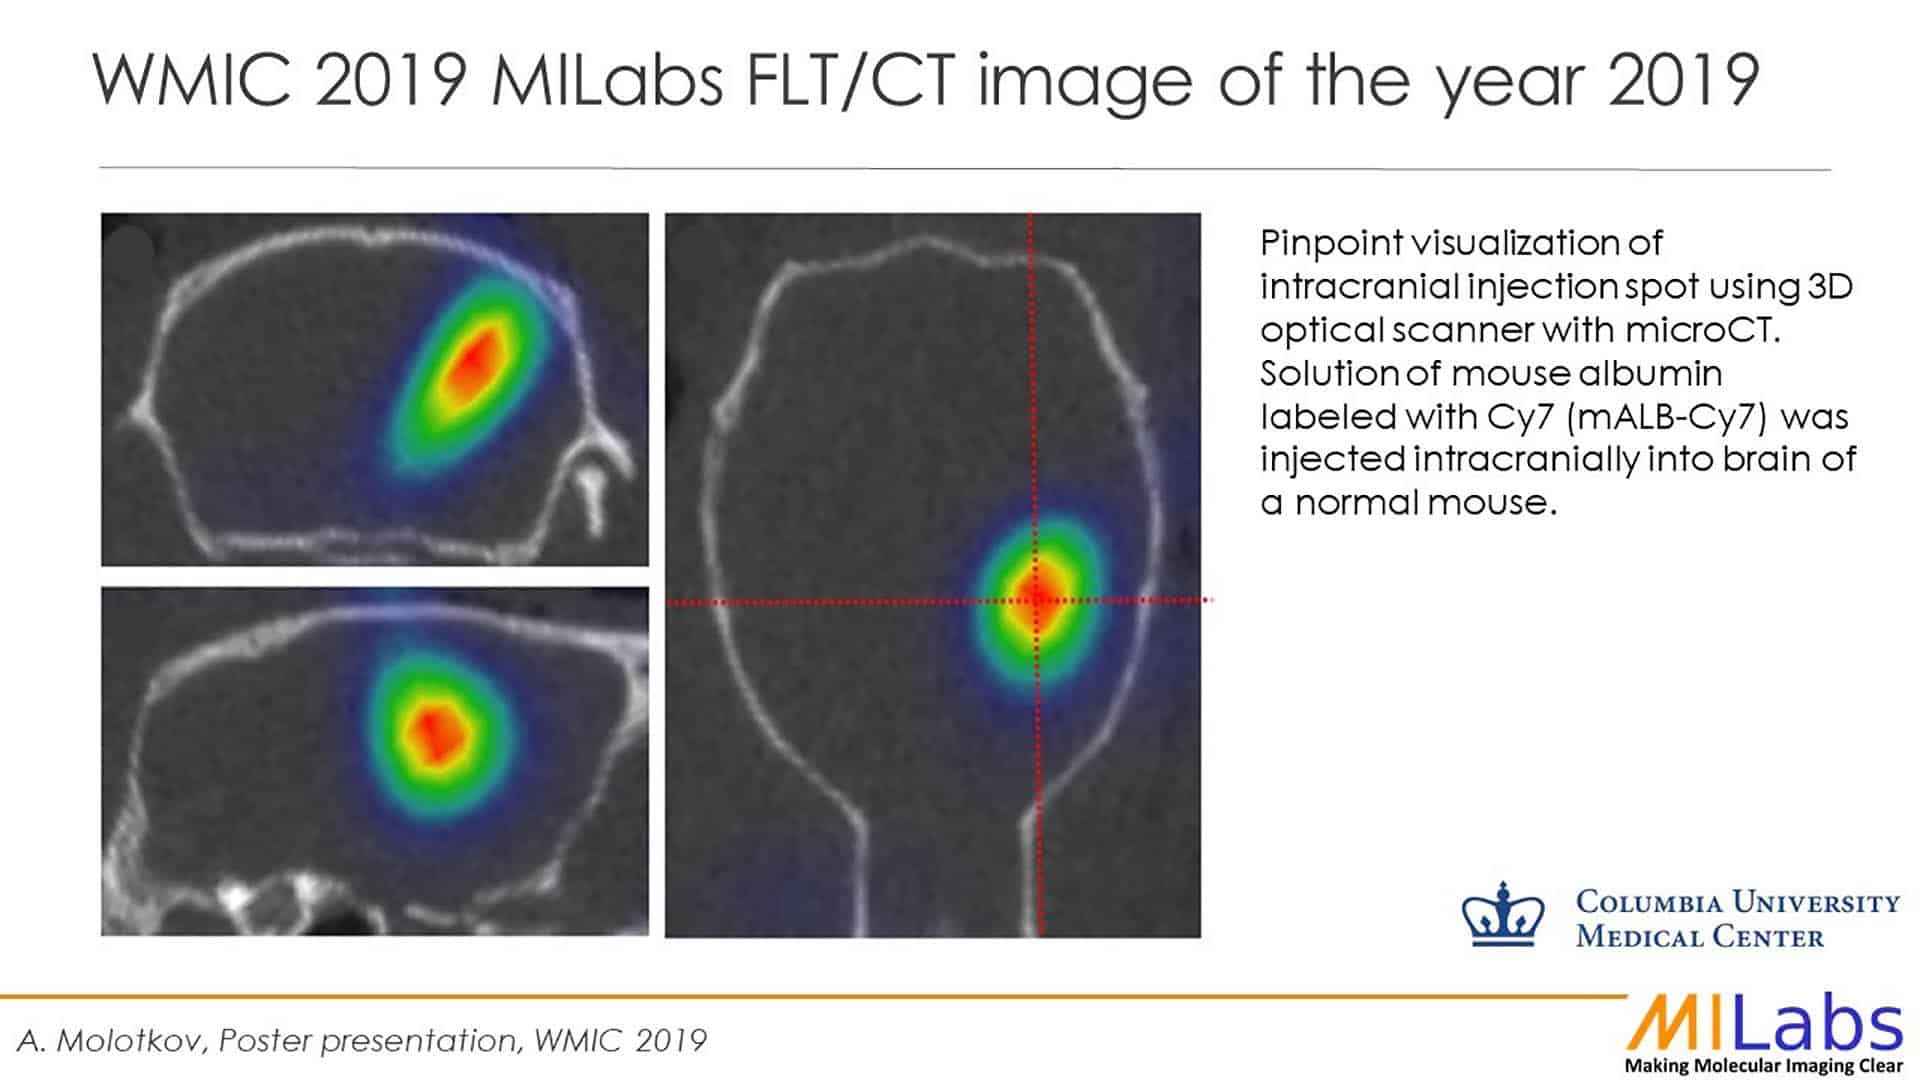 MILabs image of the year 2019 slide